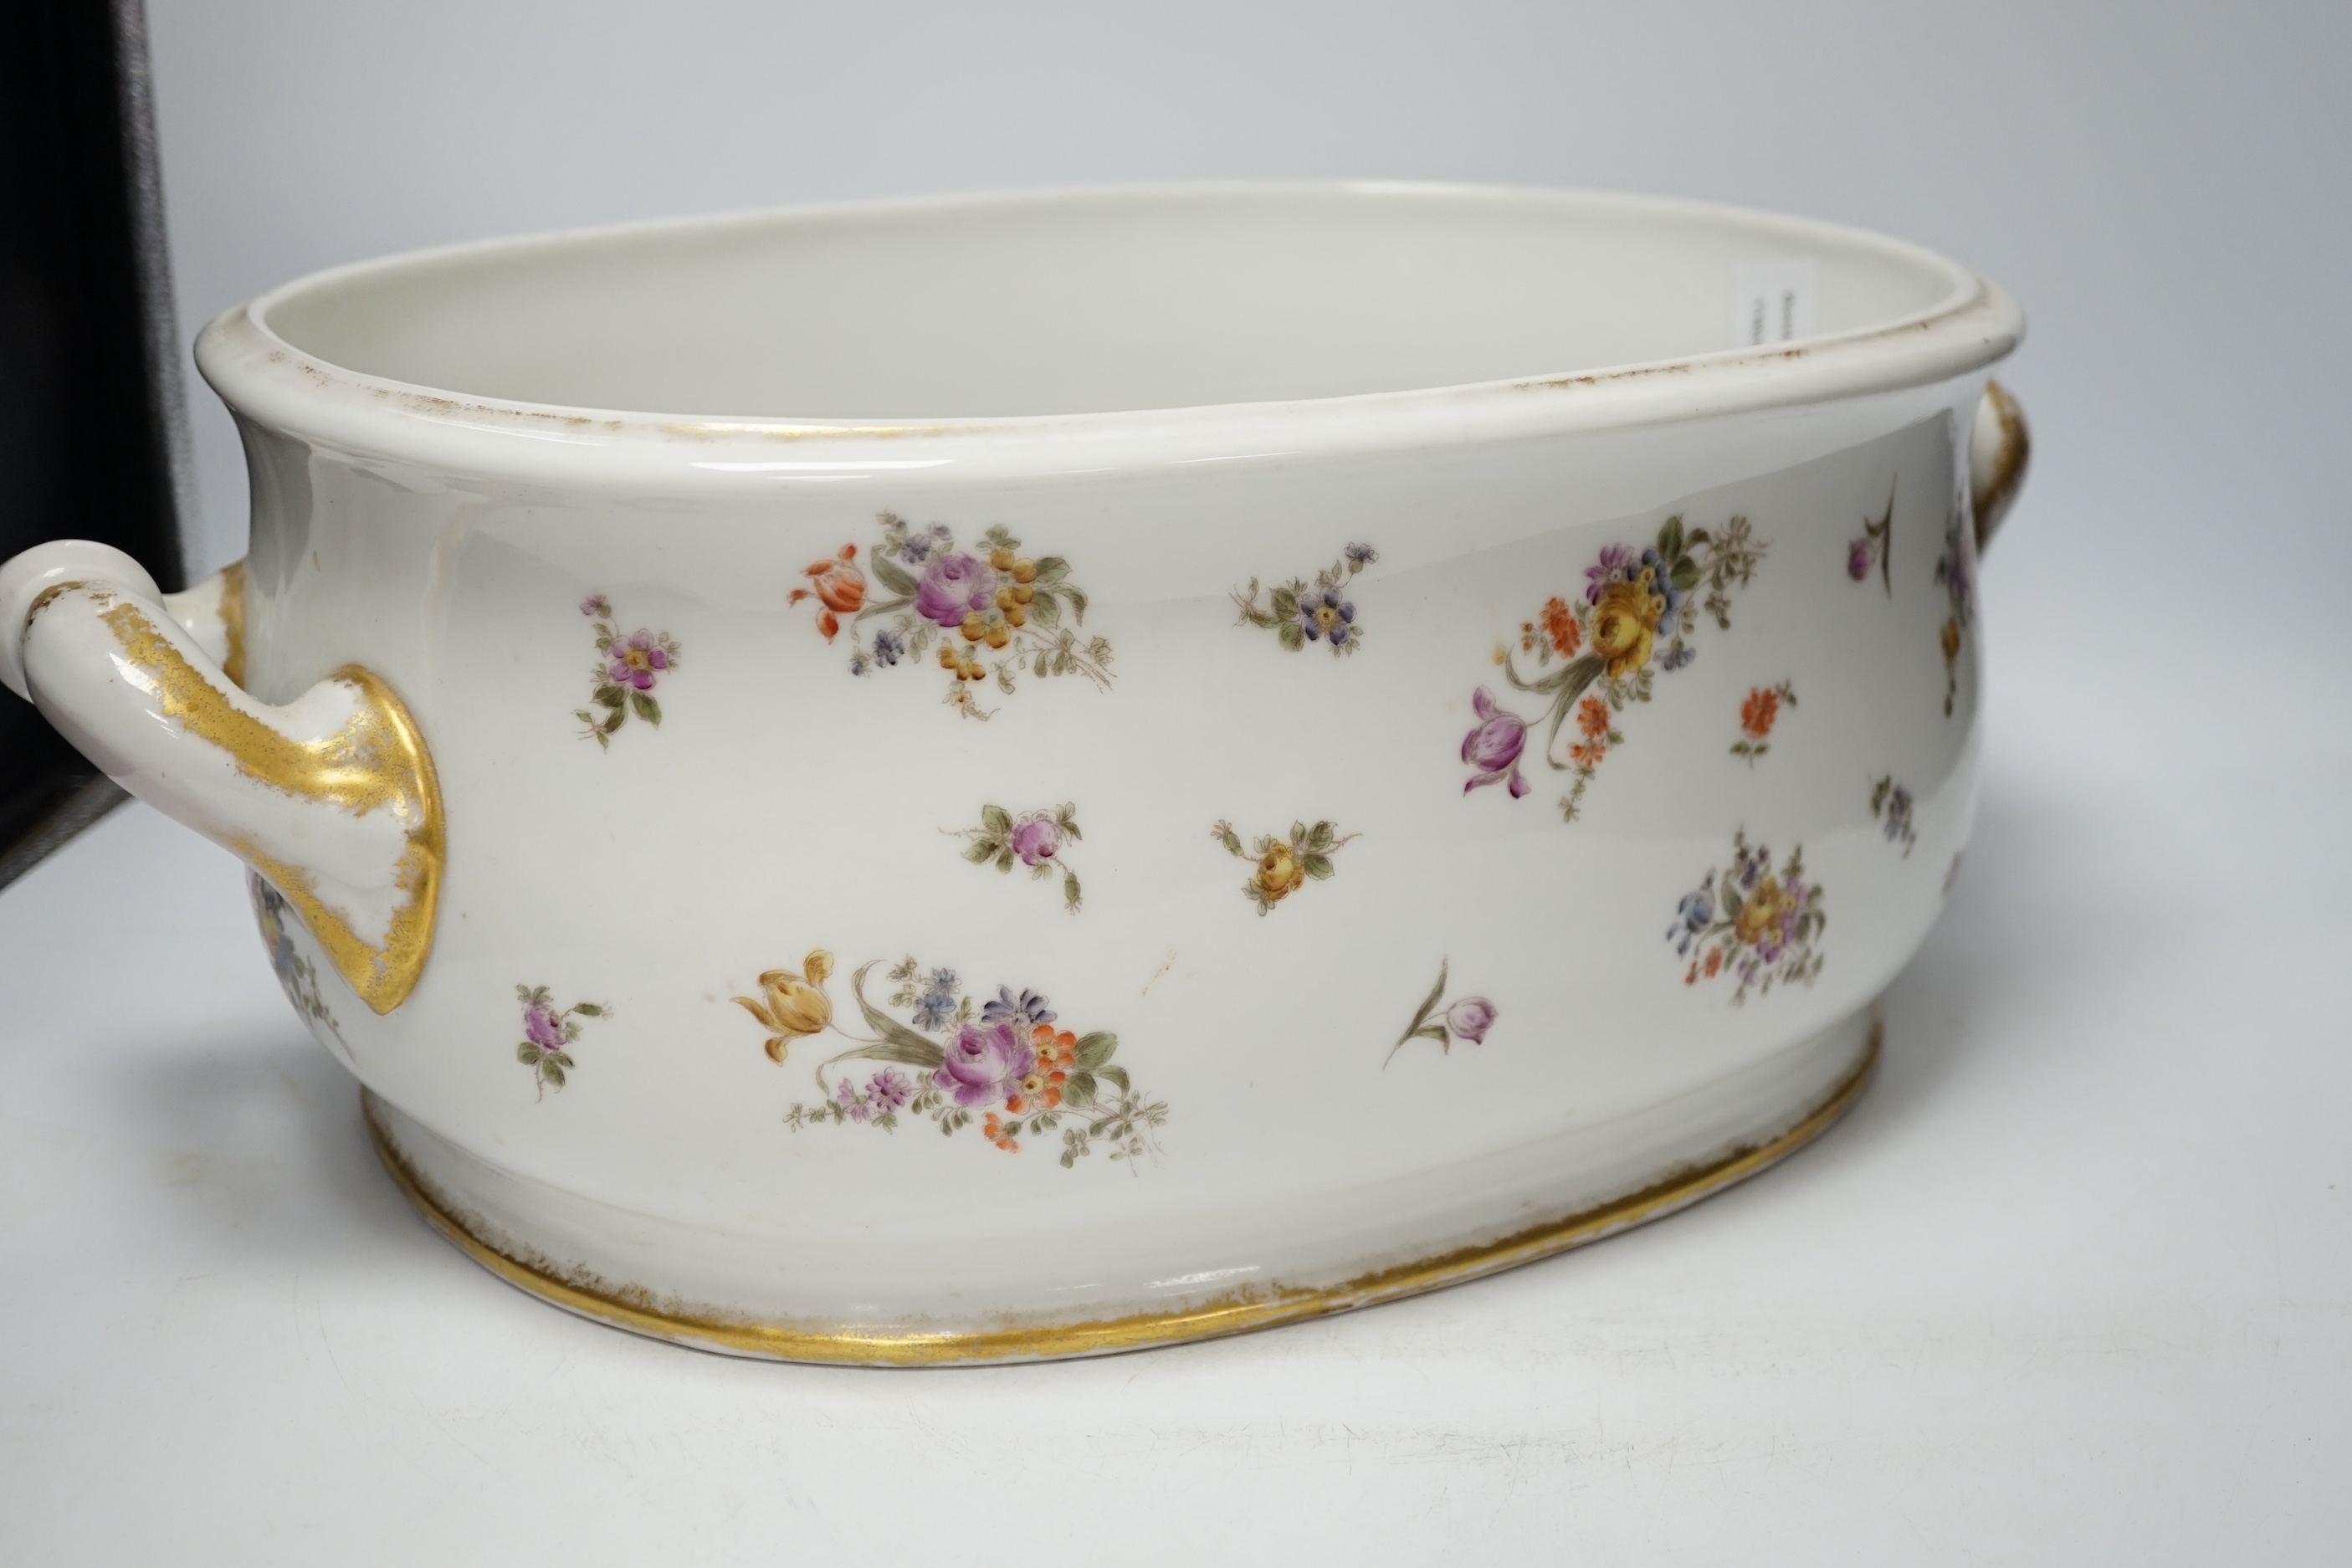 An Edwardian porcelain floral and gilt decorated foot bath, top 40cm wide not including handles - Image 3 of 5